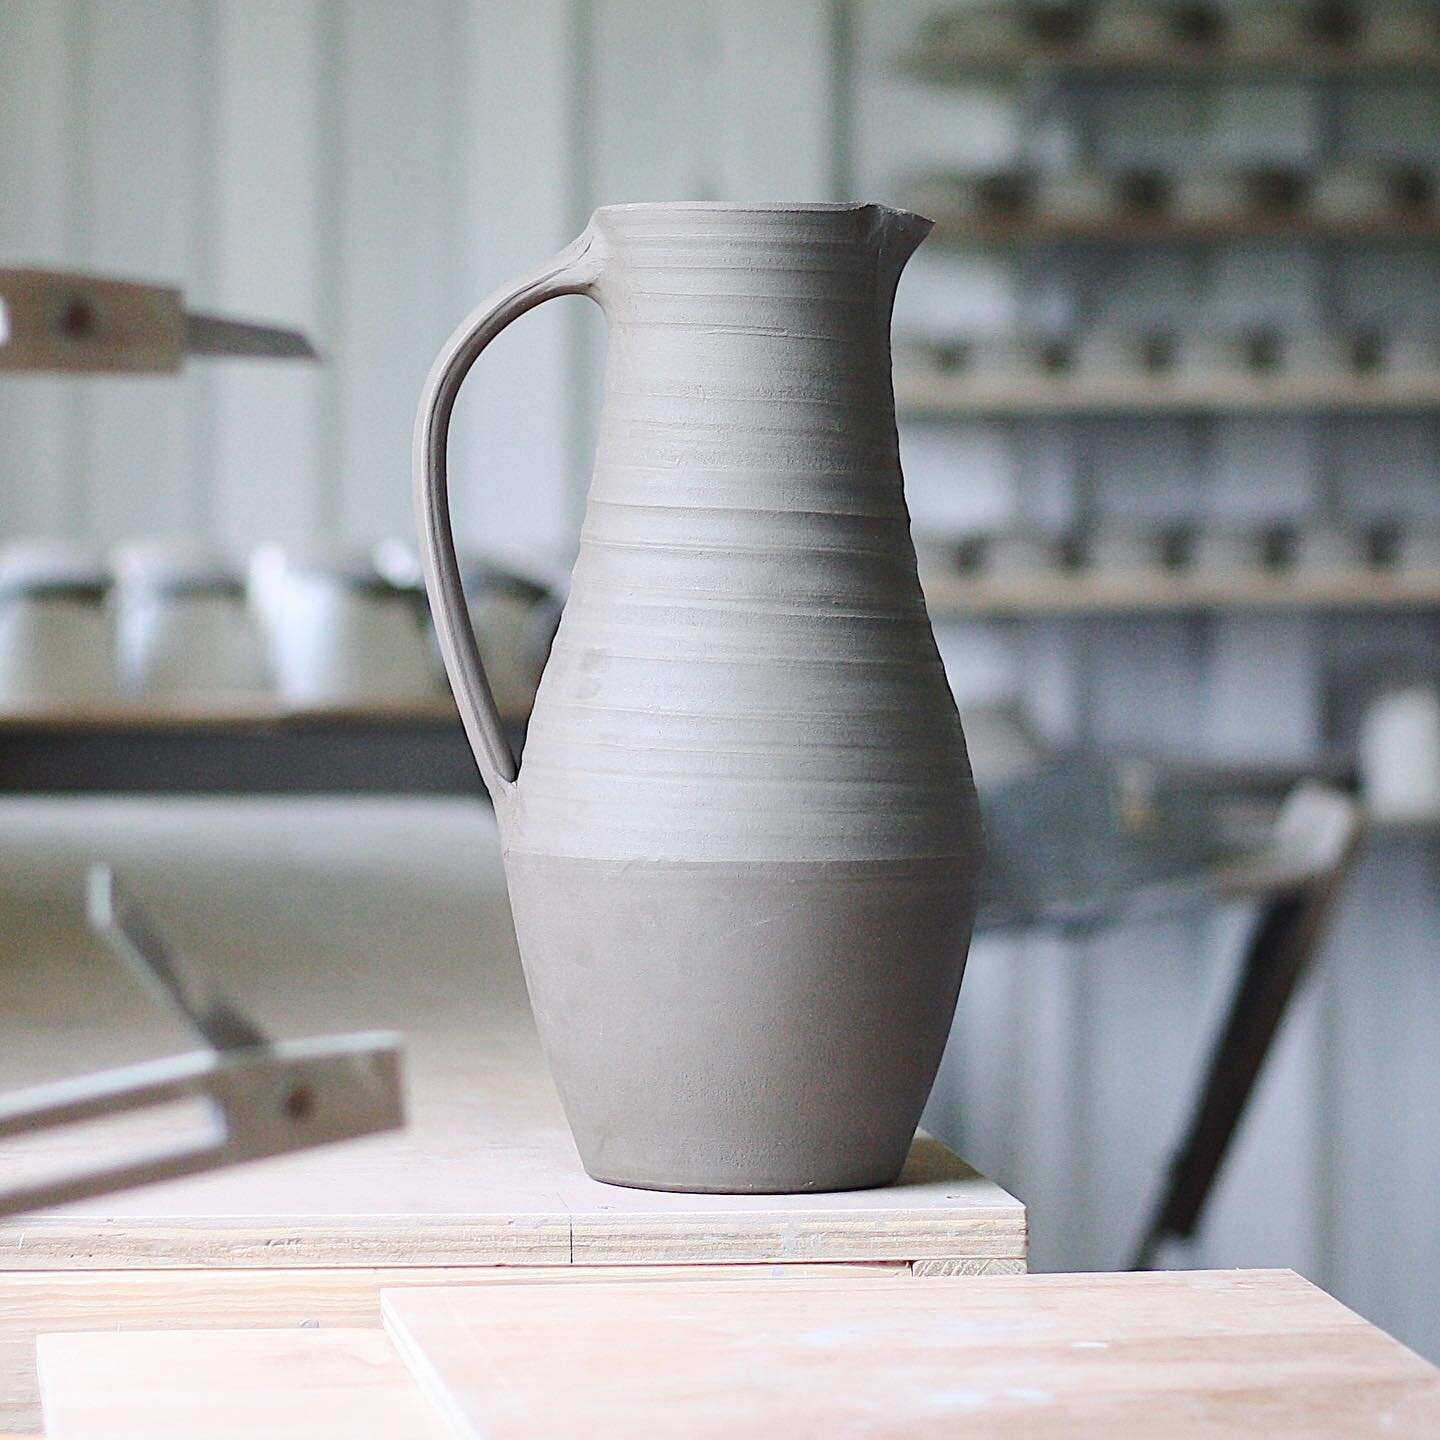 Once I&rsquo;ve made my way through a chunky order that&rsquo;s been keeping me busy in the studio, I&rsquo;ll have an online shop in my sights. My plan is to make a relatively tight range of functional pots, but with a nice selection of larger one o